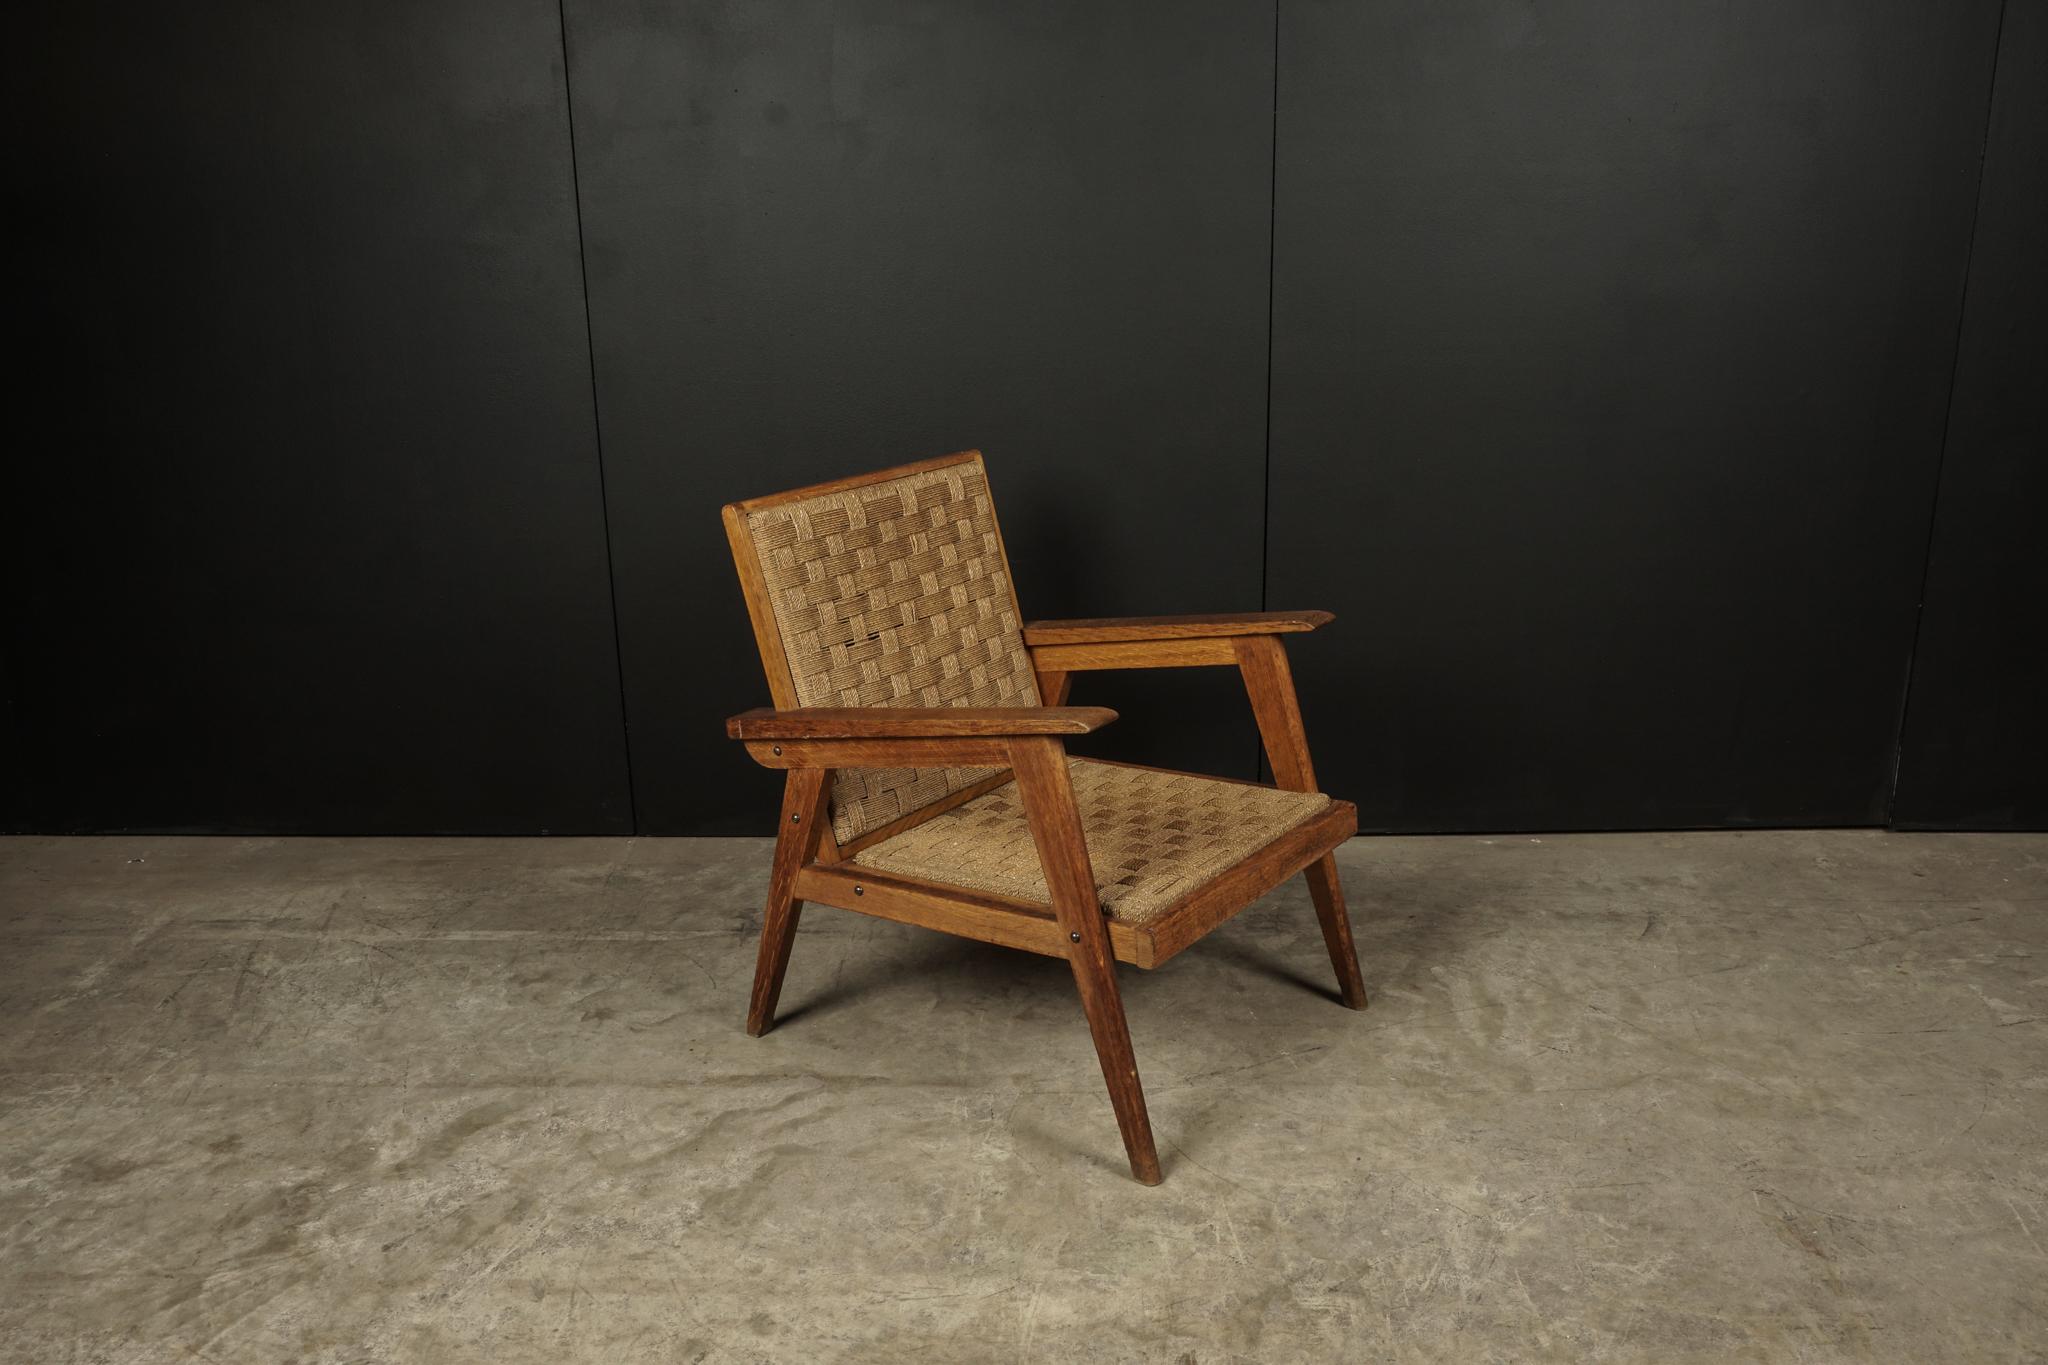 Midcentury chair from France, circa, 1970. Solid oak construction with woven rush seat and back.